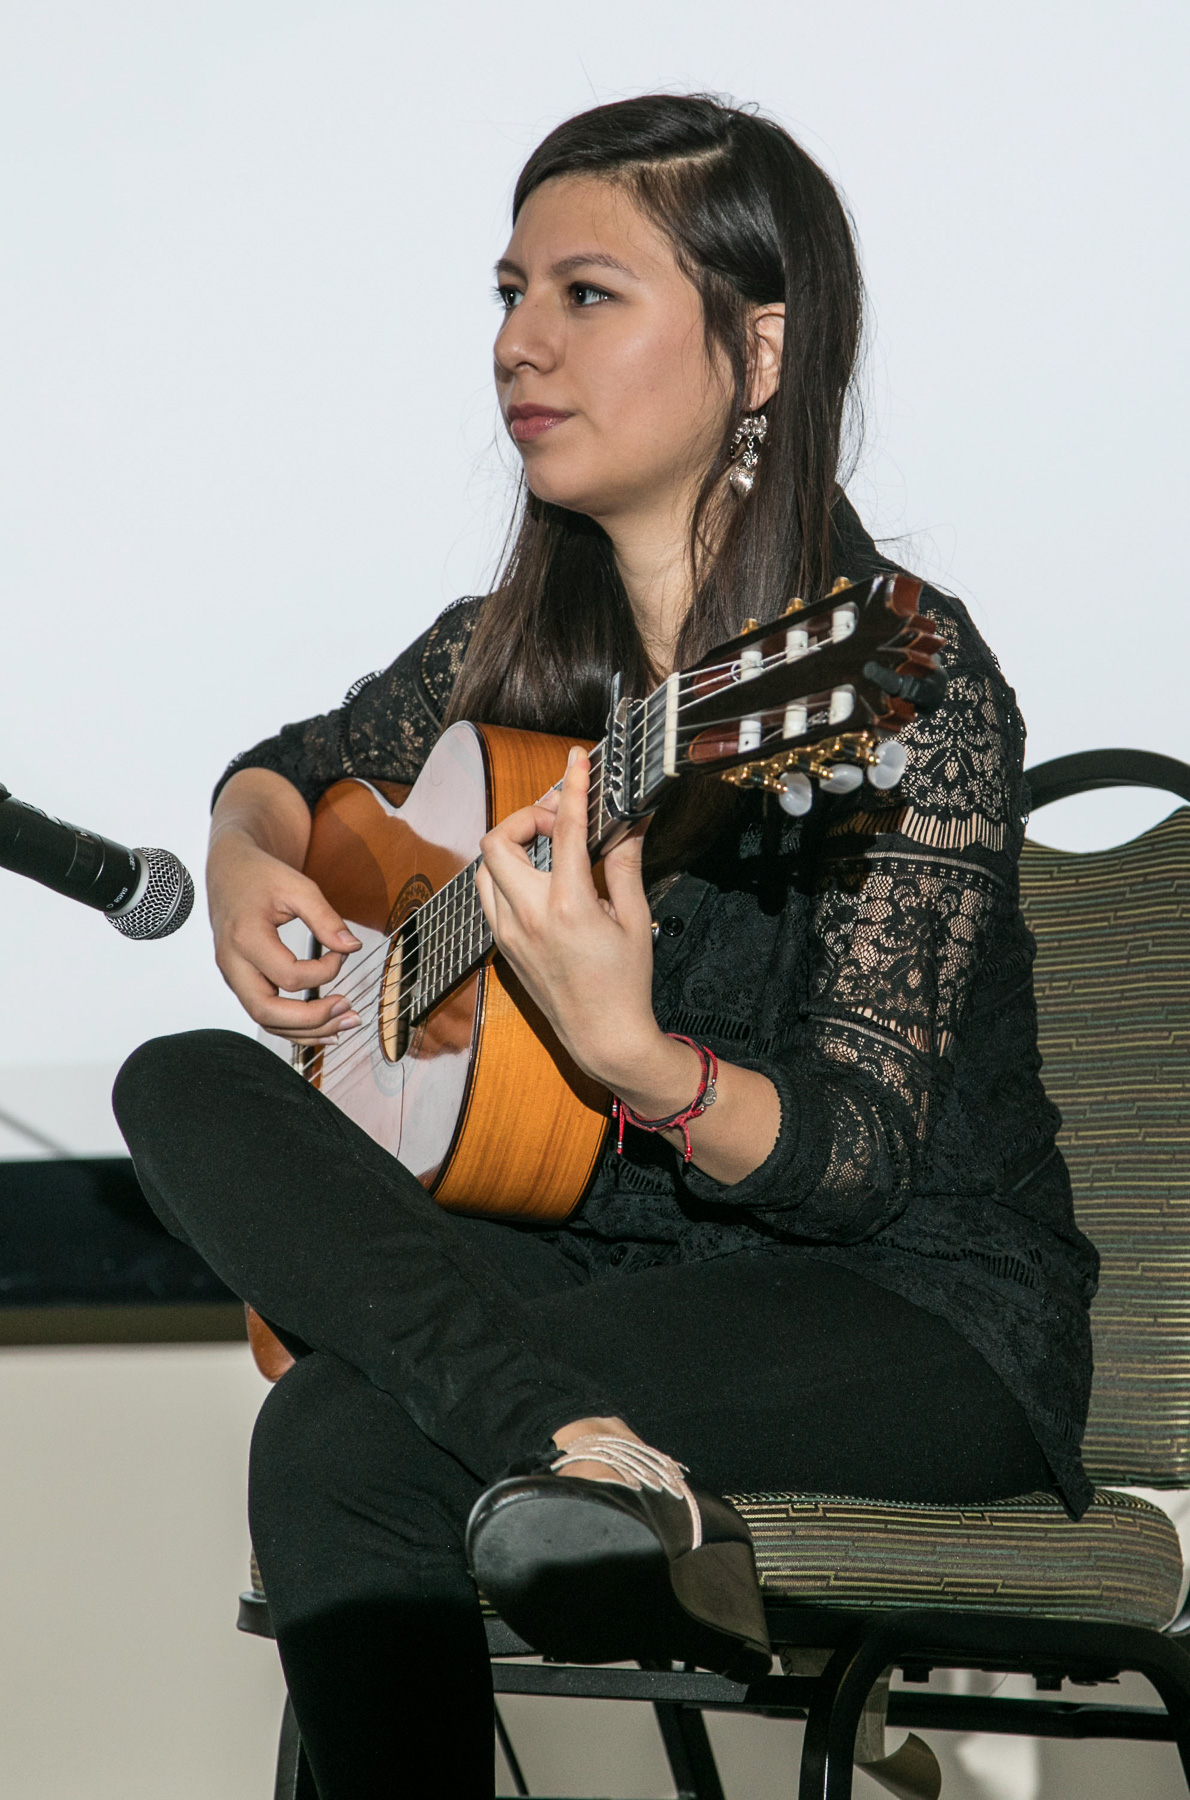 Guitarist Monserrat Salcedo performs for the crowd during the 2017 Dolores Huerta Prayer Breakfast honoring the activist, organizer, feminist, civil and labor rights hero and recipient of the Presidential Medal of Freedom. (DePaul University/Jamie Moncrief)